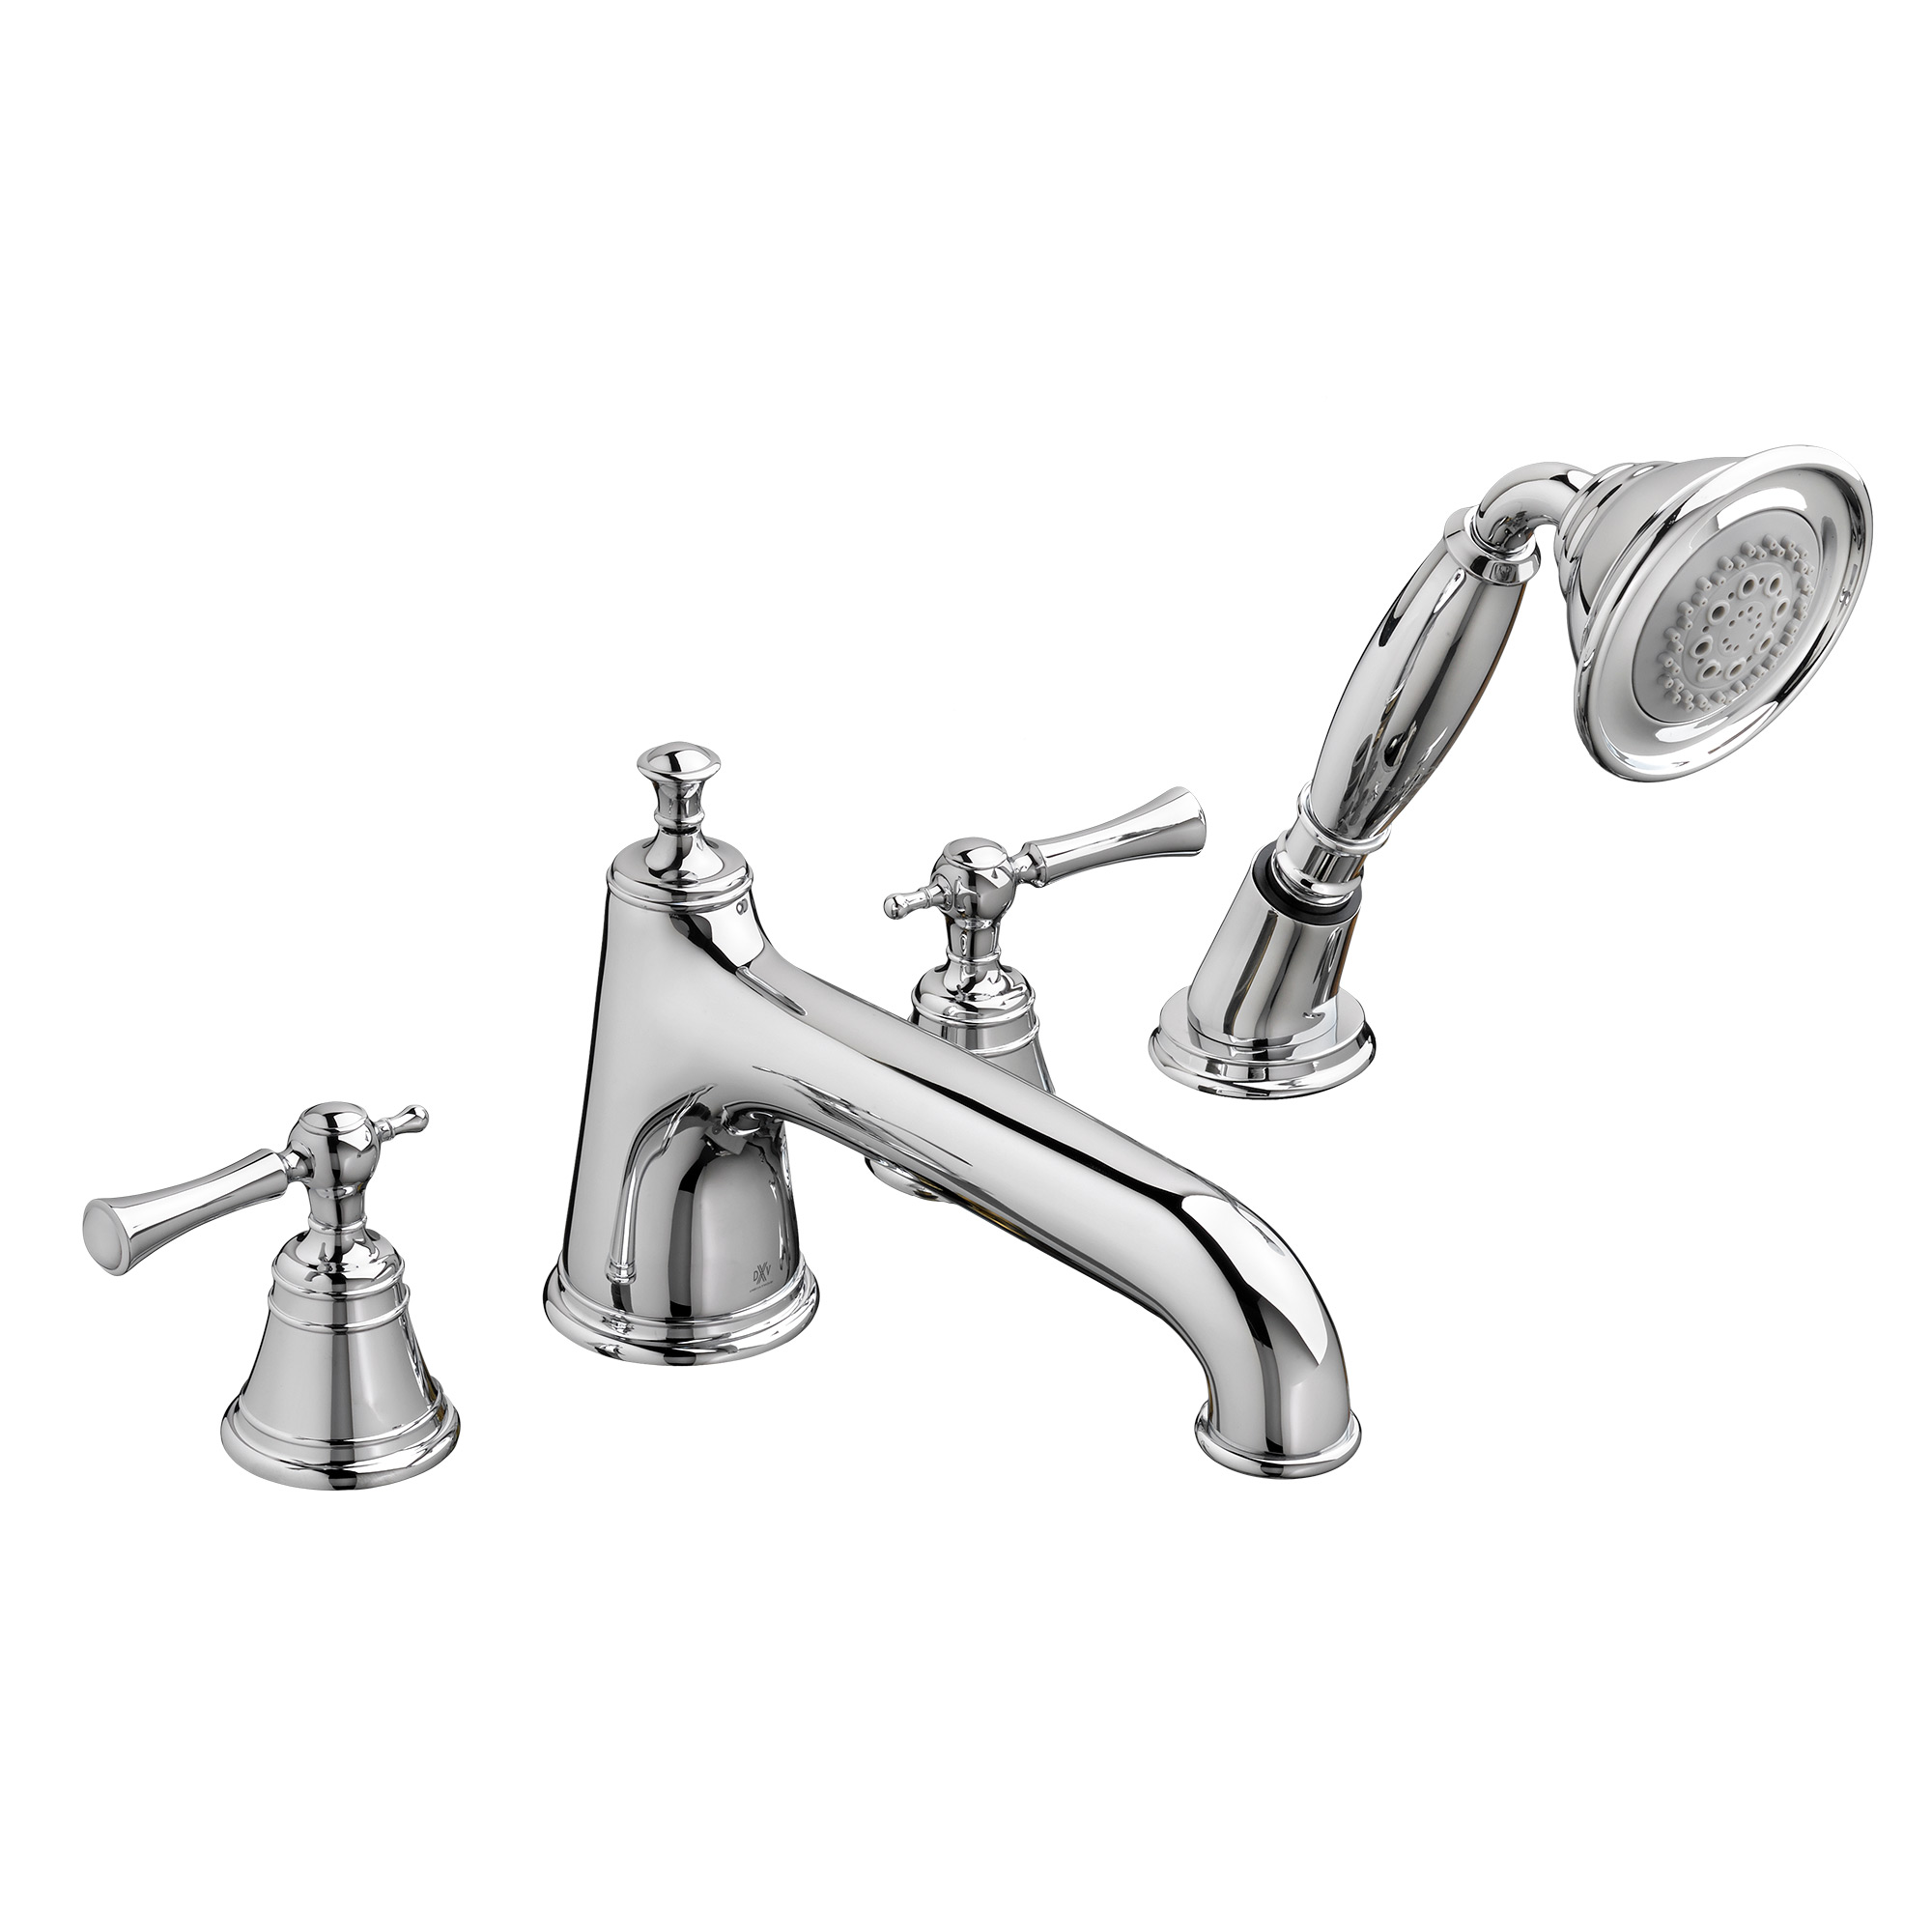 Randall 2-Handle Deck Mount Bathtub Faucet with Hand Shower and Lever Handles